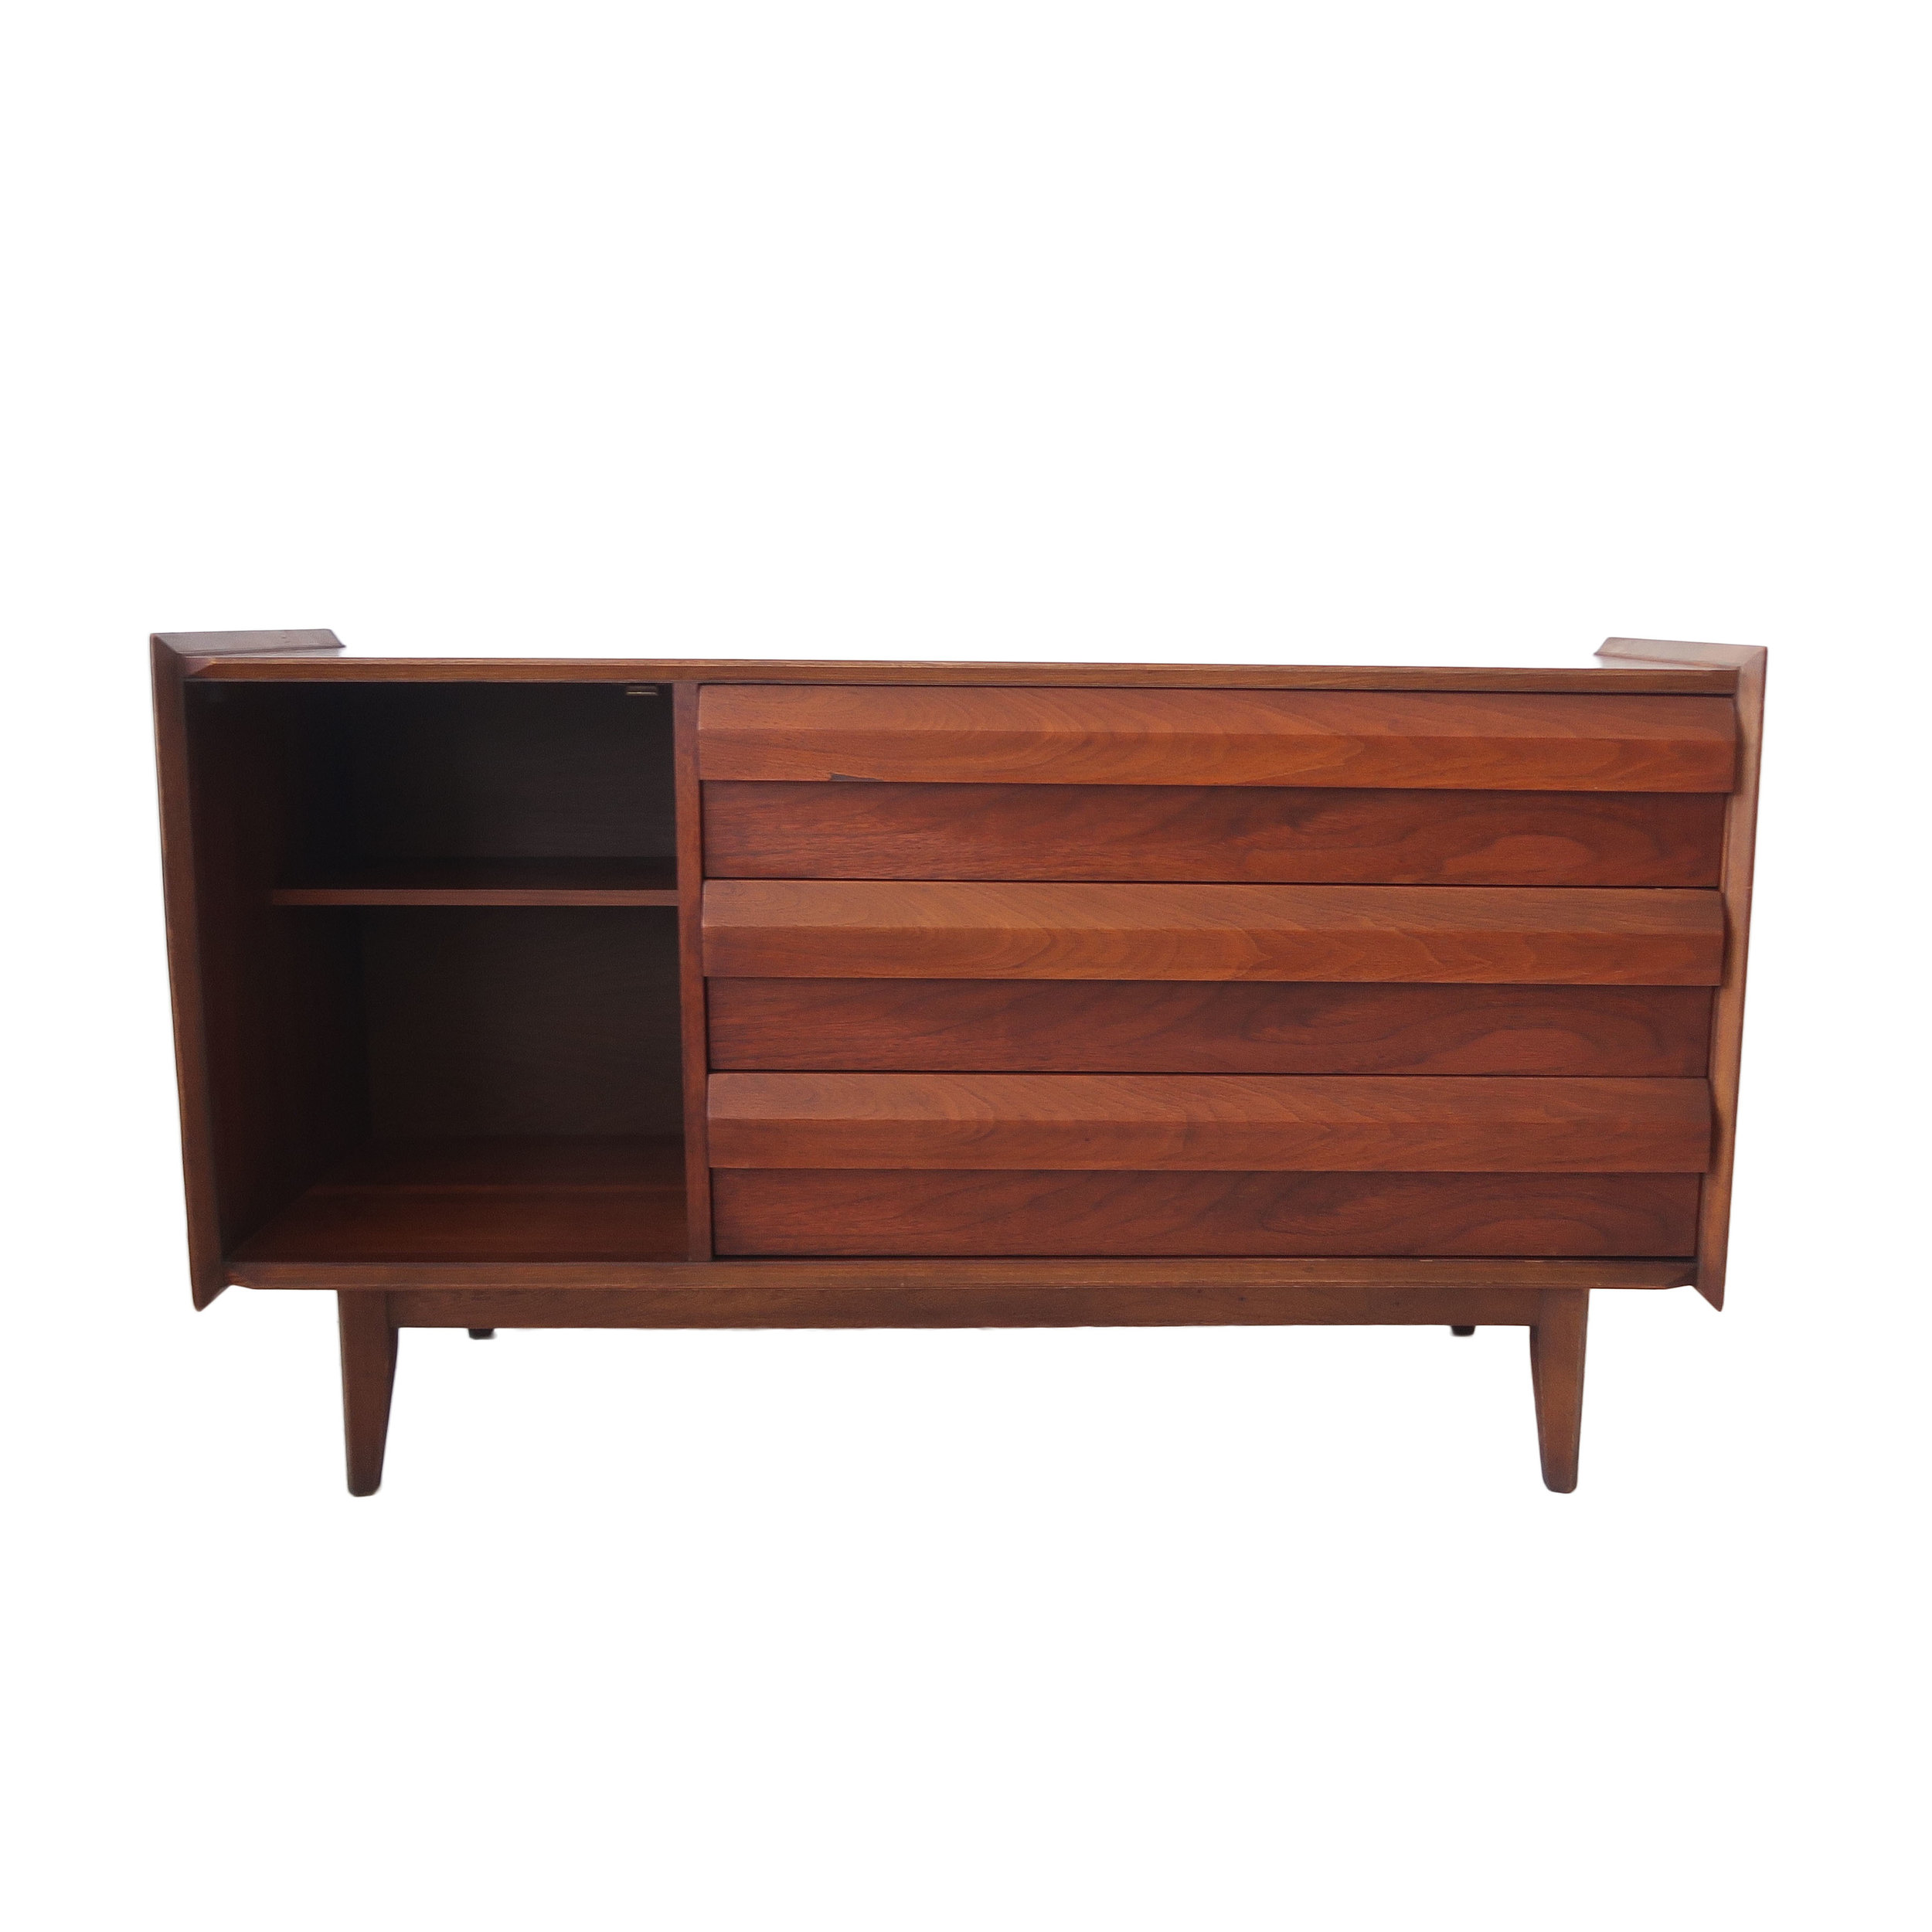 vintage lane credenza with open shelves and 3 drawers.jpg